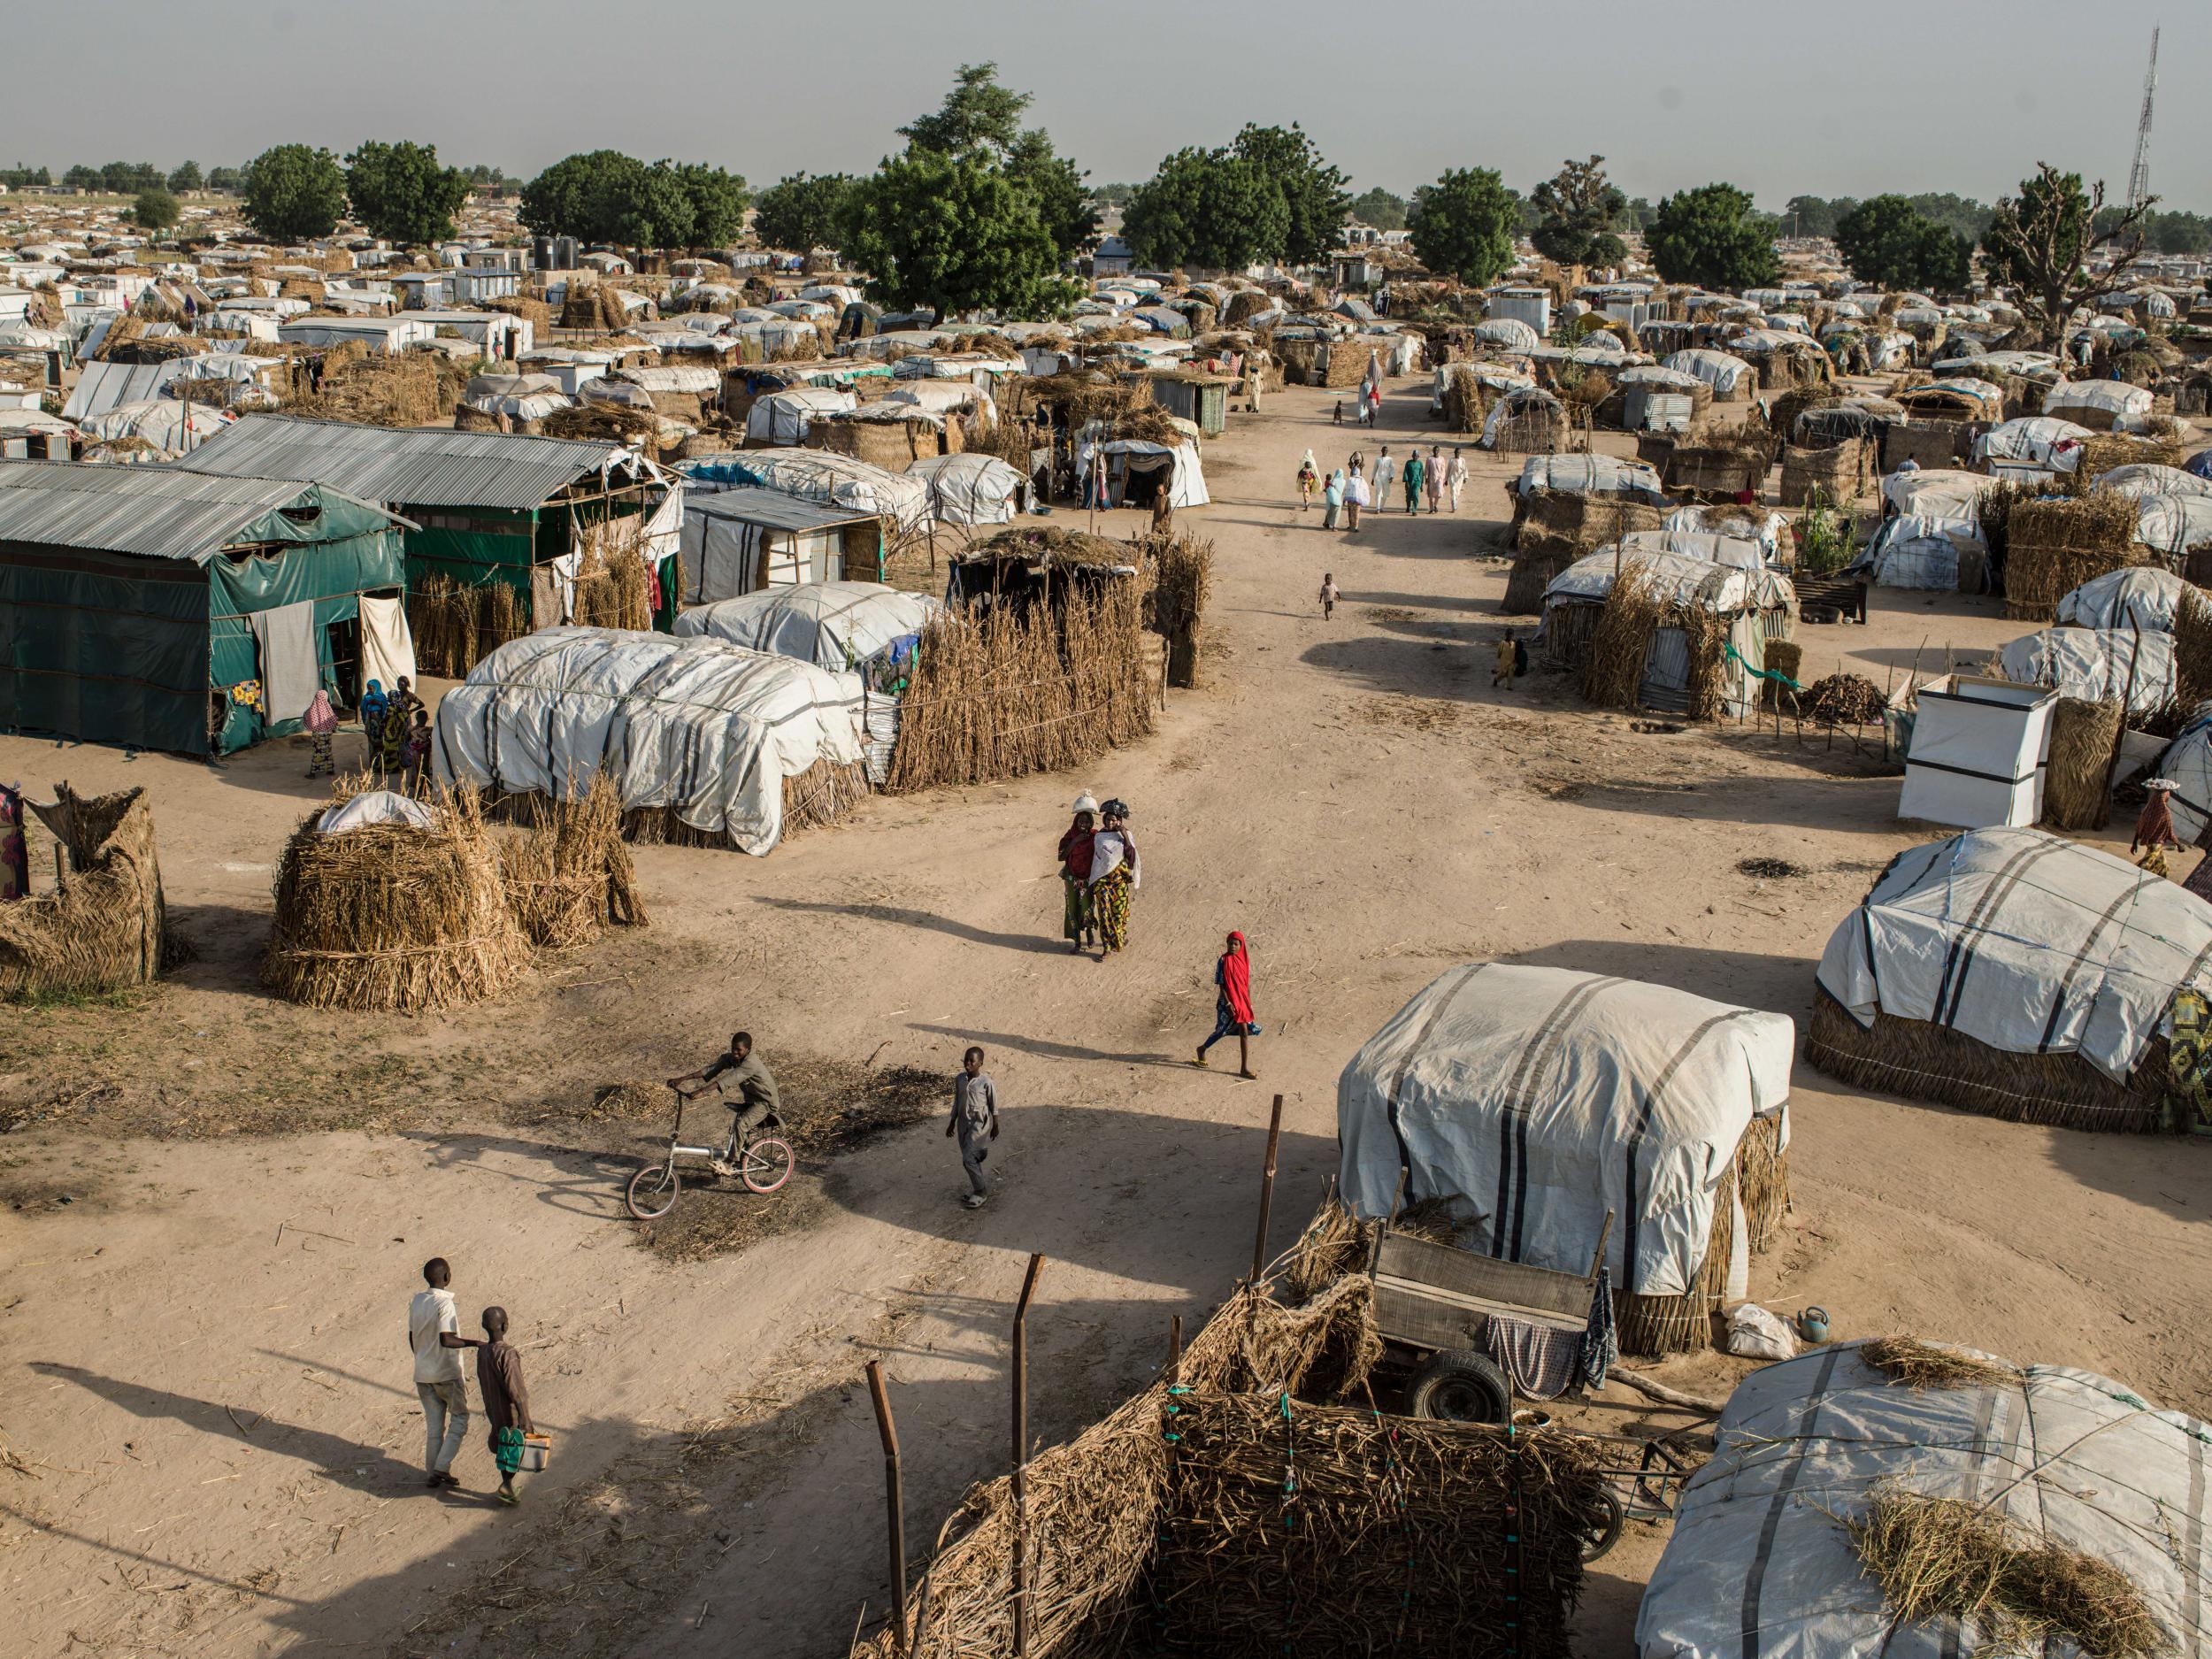 A view of the Muna camp for displaced persons, located just outside of Maiduguri, Nigeria. Today the camp is estimated to shelter approximately 24,000 displaced people